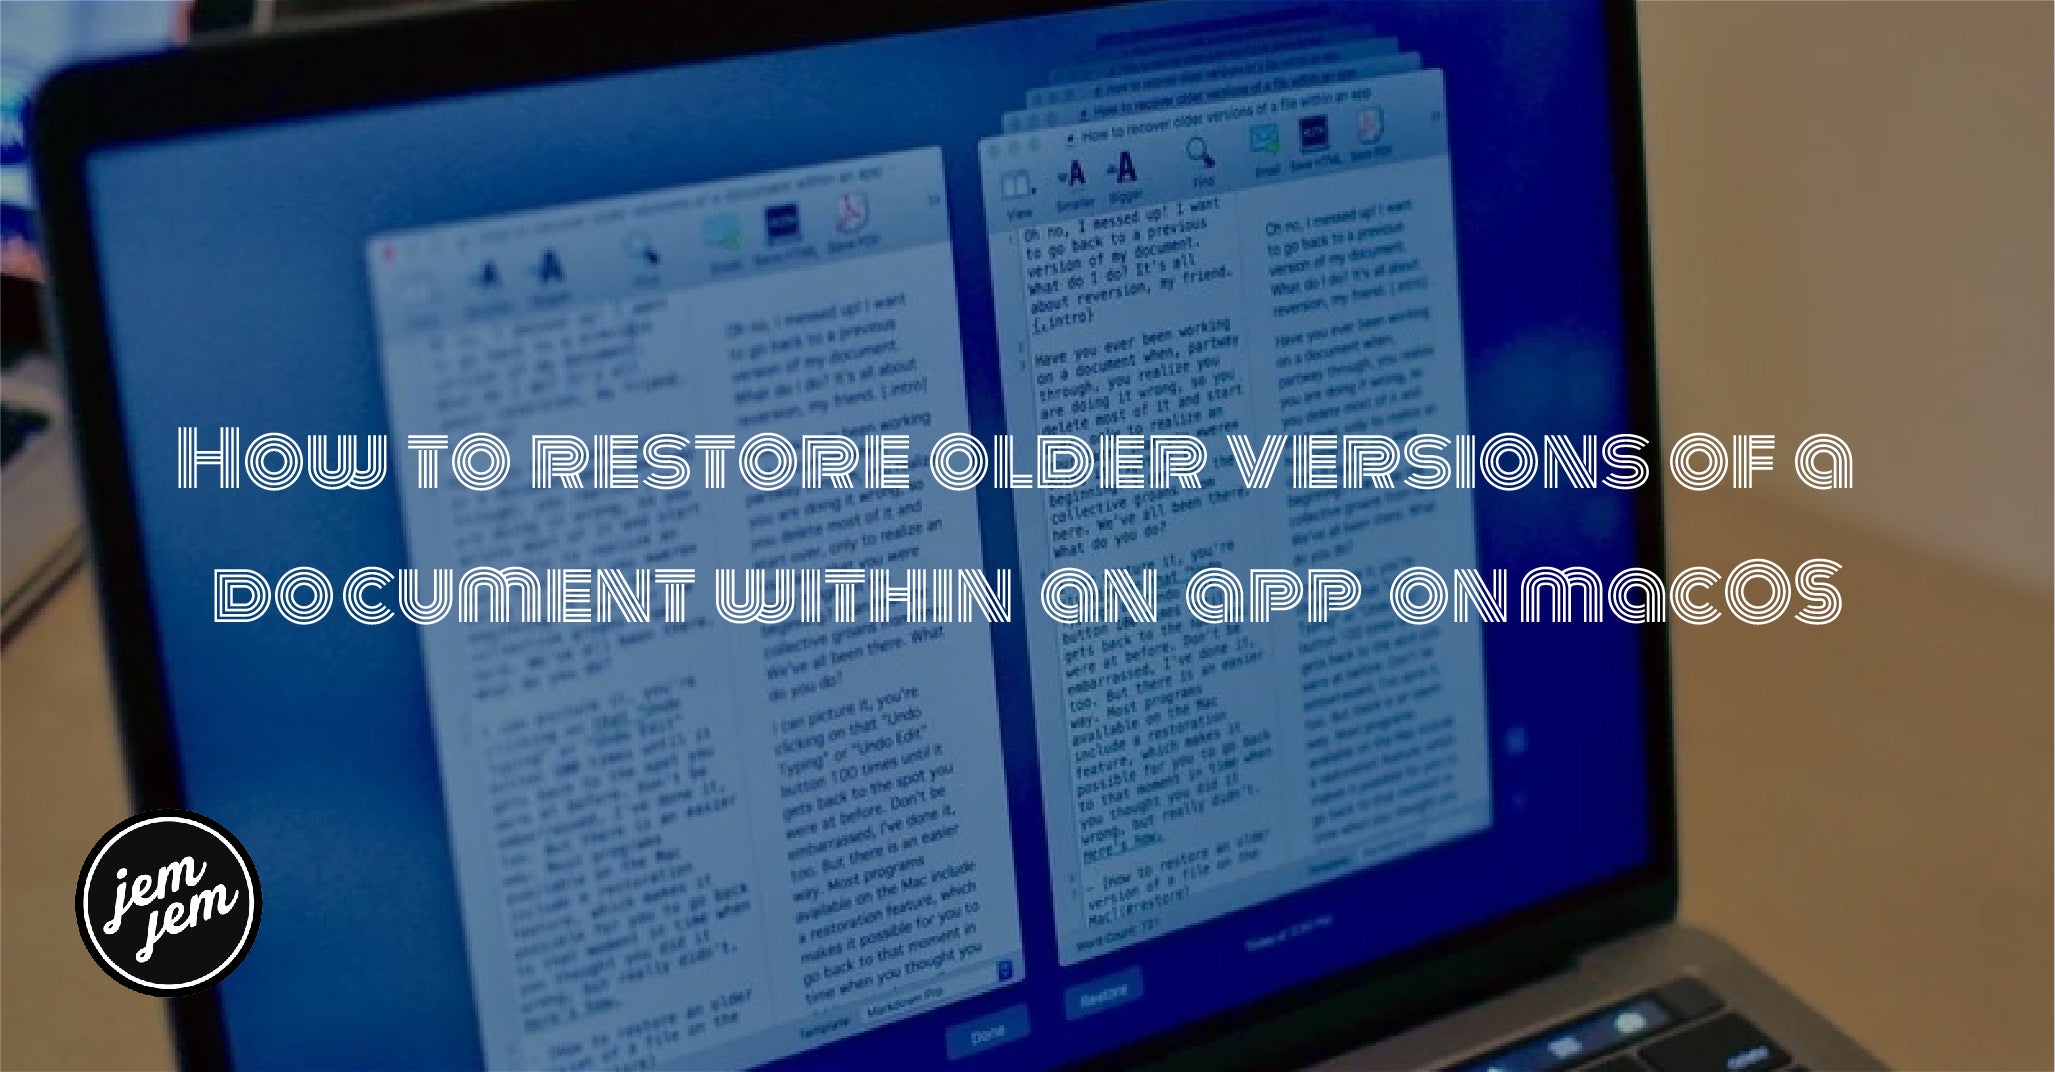 How to restore older versions of a document within an app on macOS